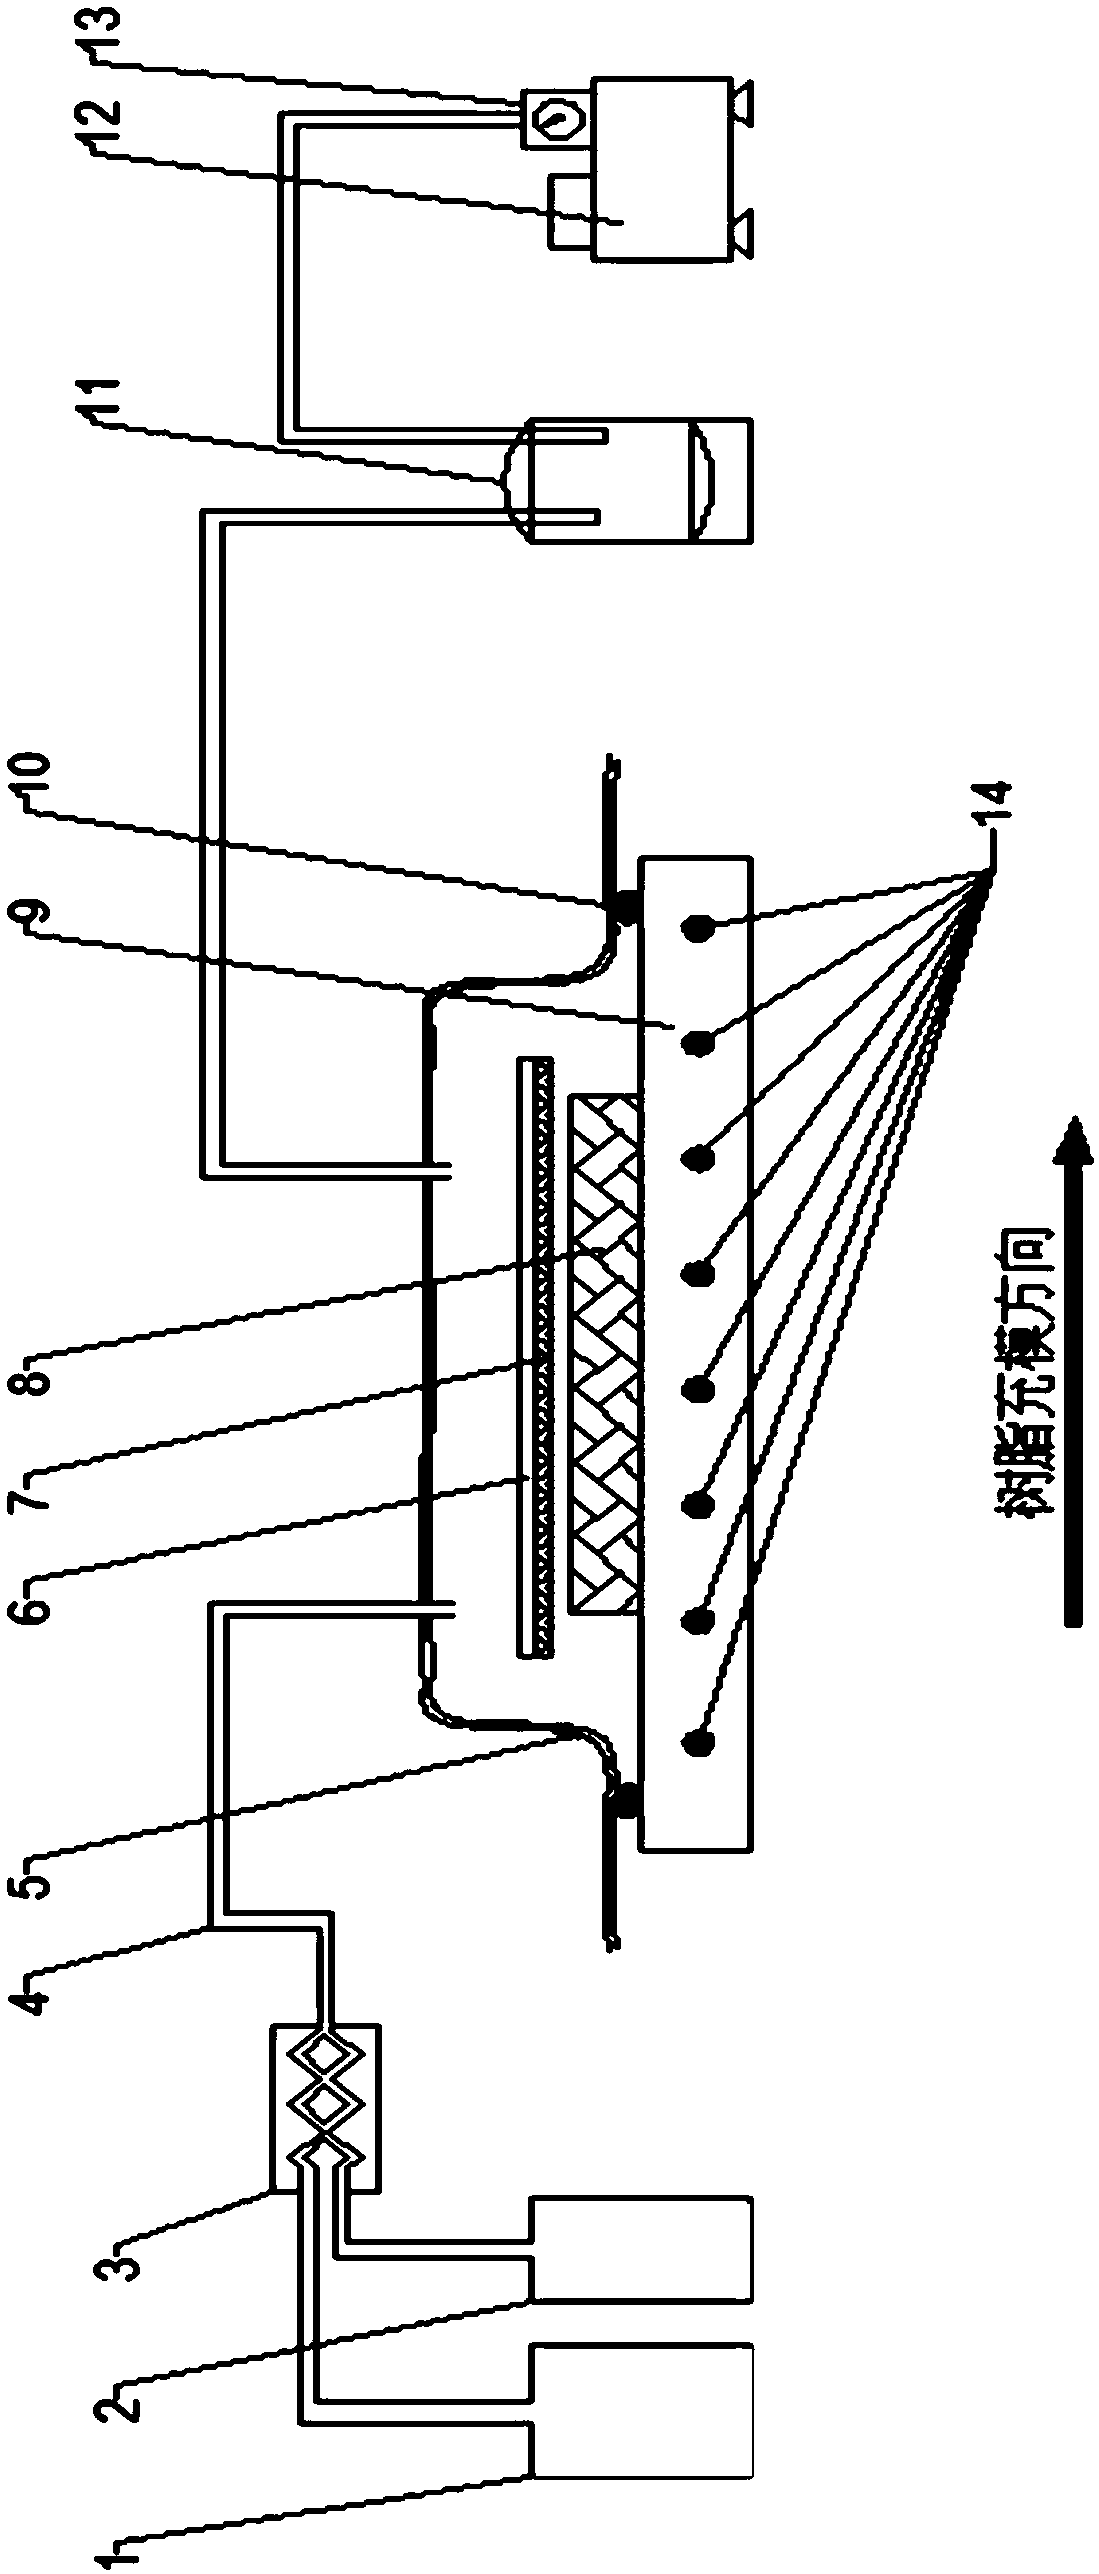 Device and method for measuring fiber permeability of flat plate preform